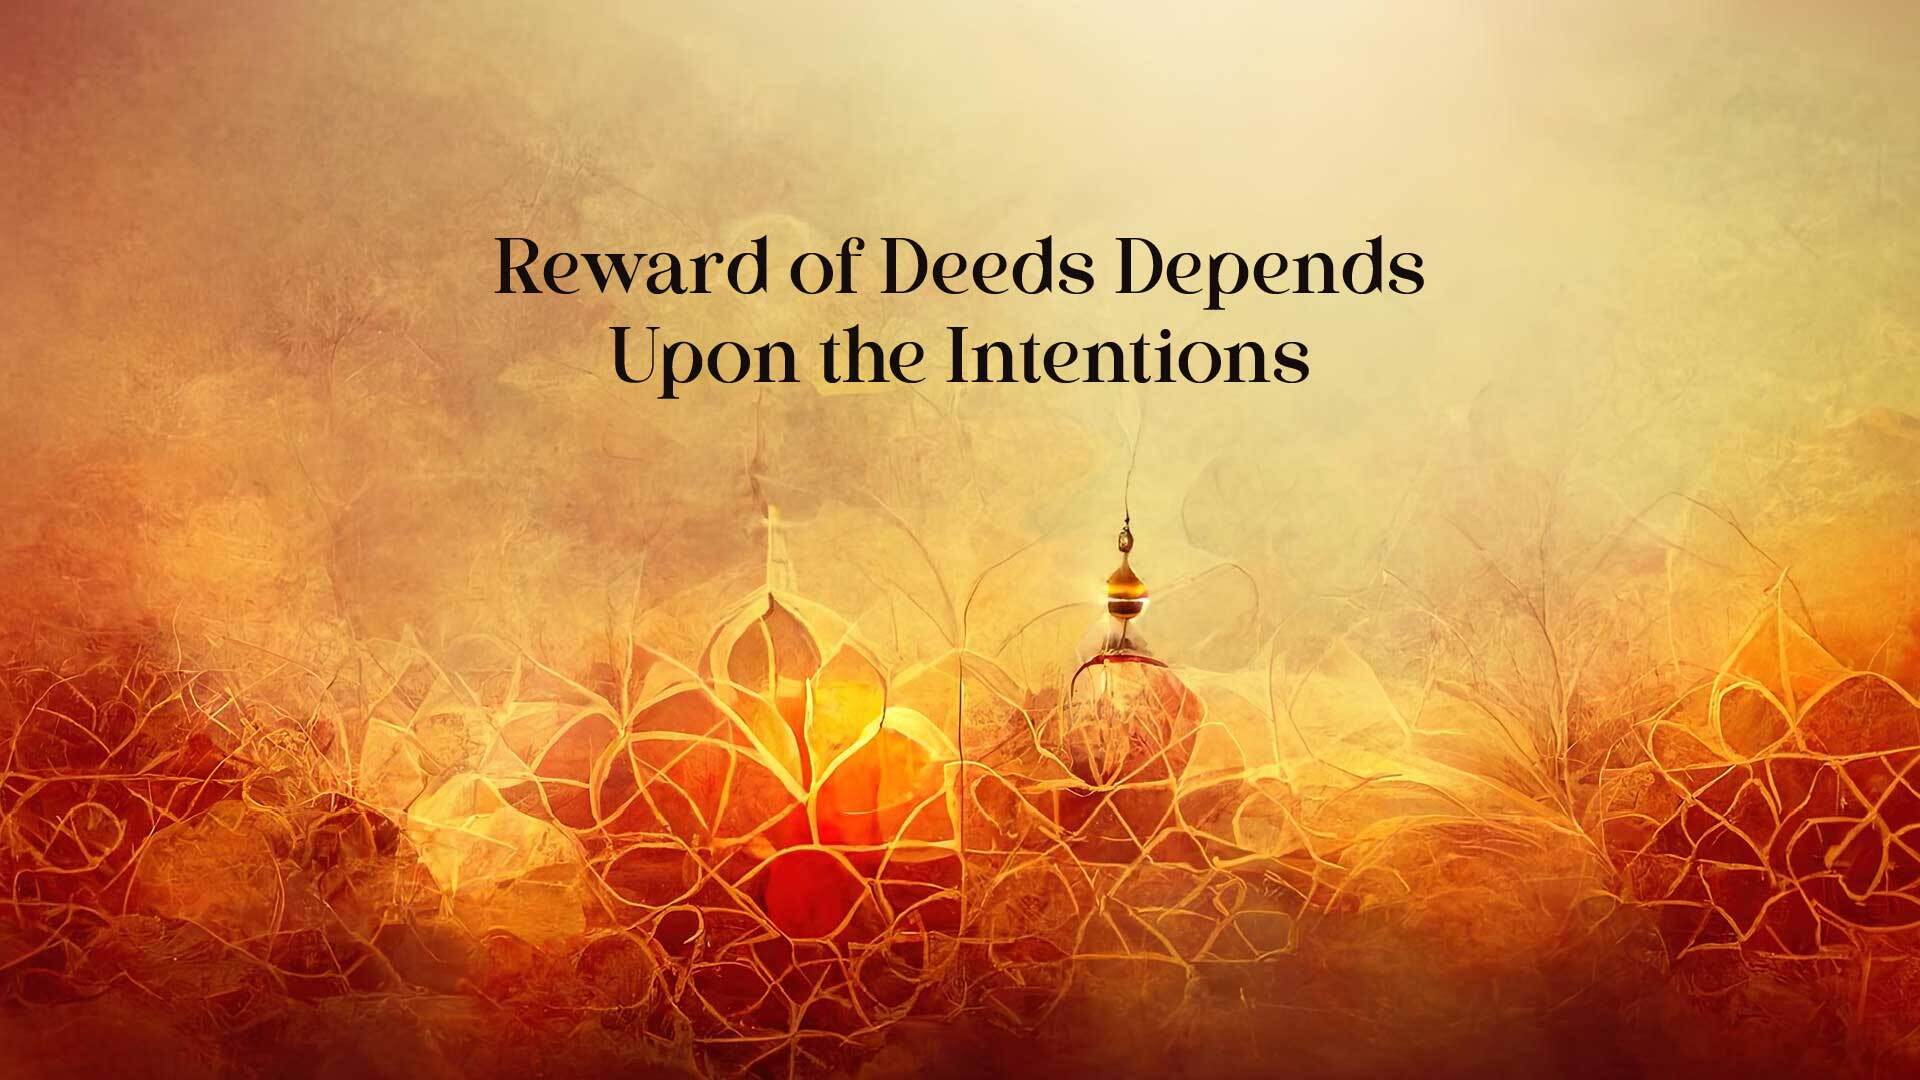 Reward of Deeds Depends Upon the Intentions